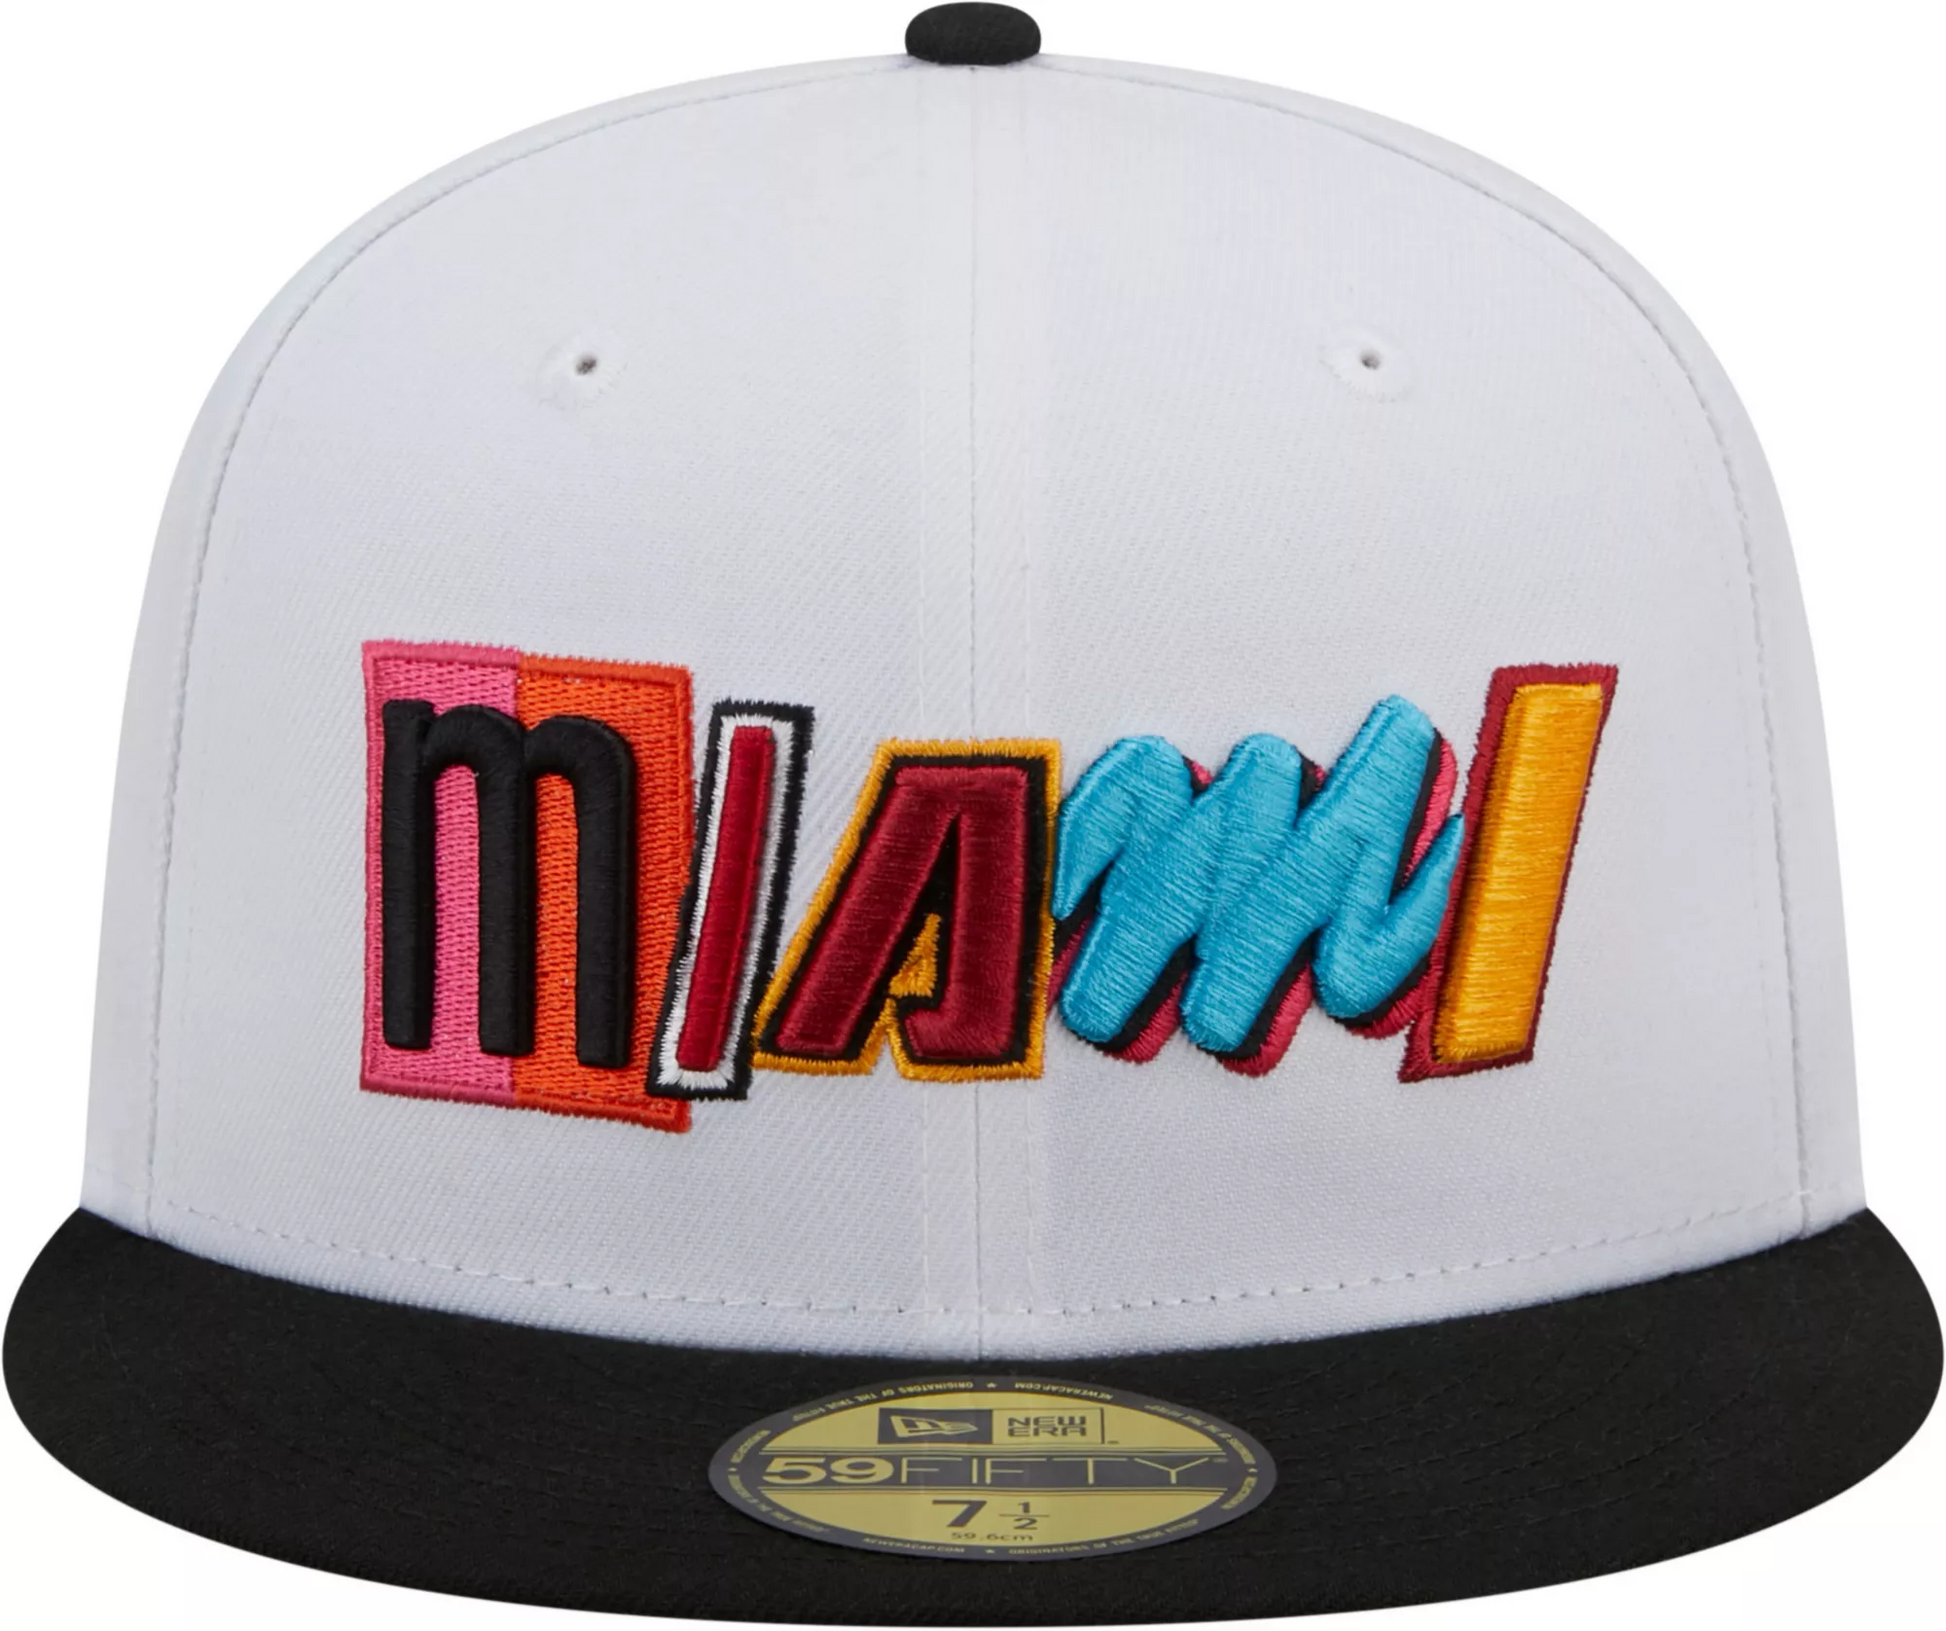 Shop New Era New Era 59Fifty Miami Heat Two Tone Fitted Hat